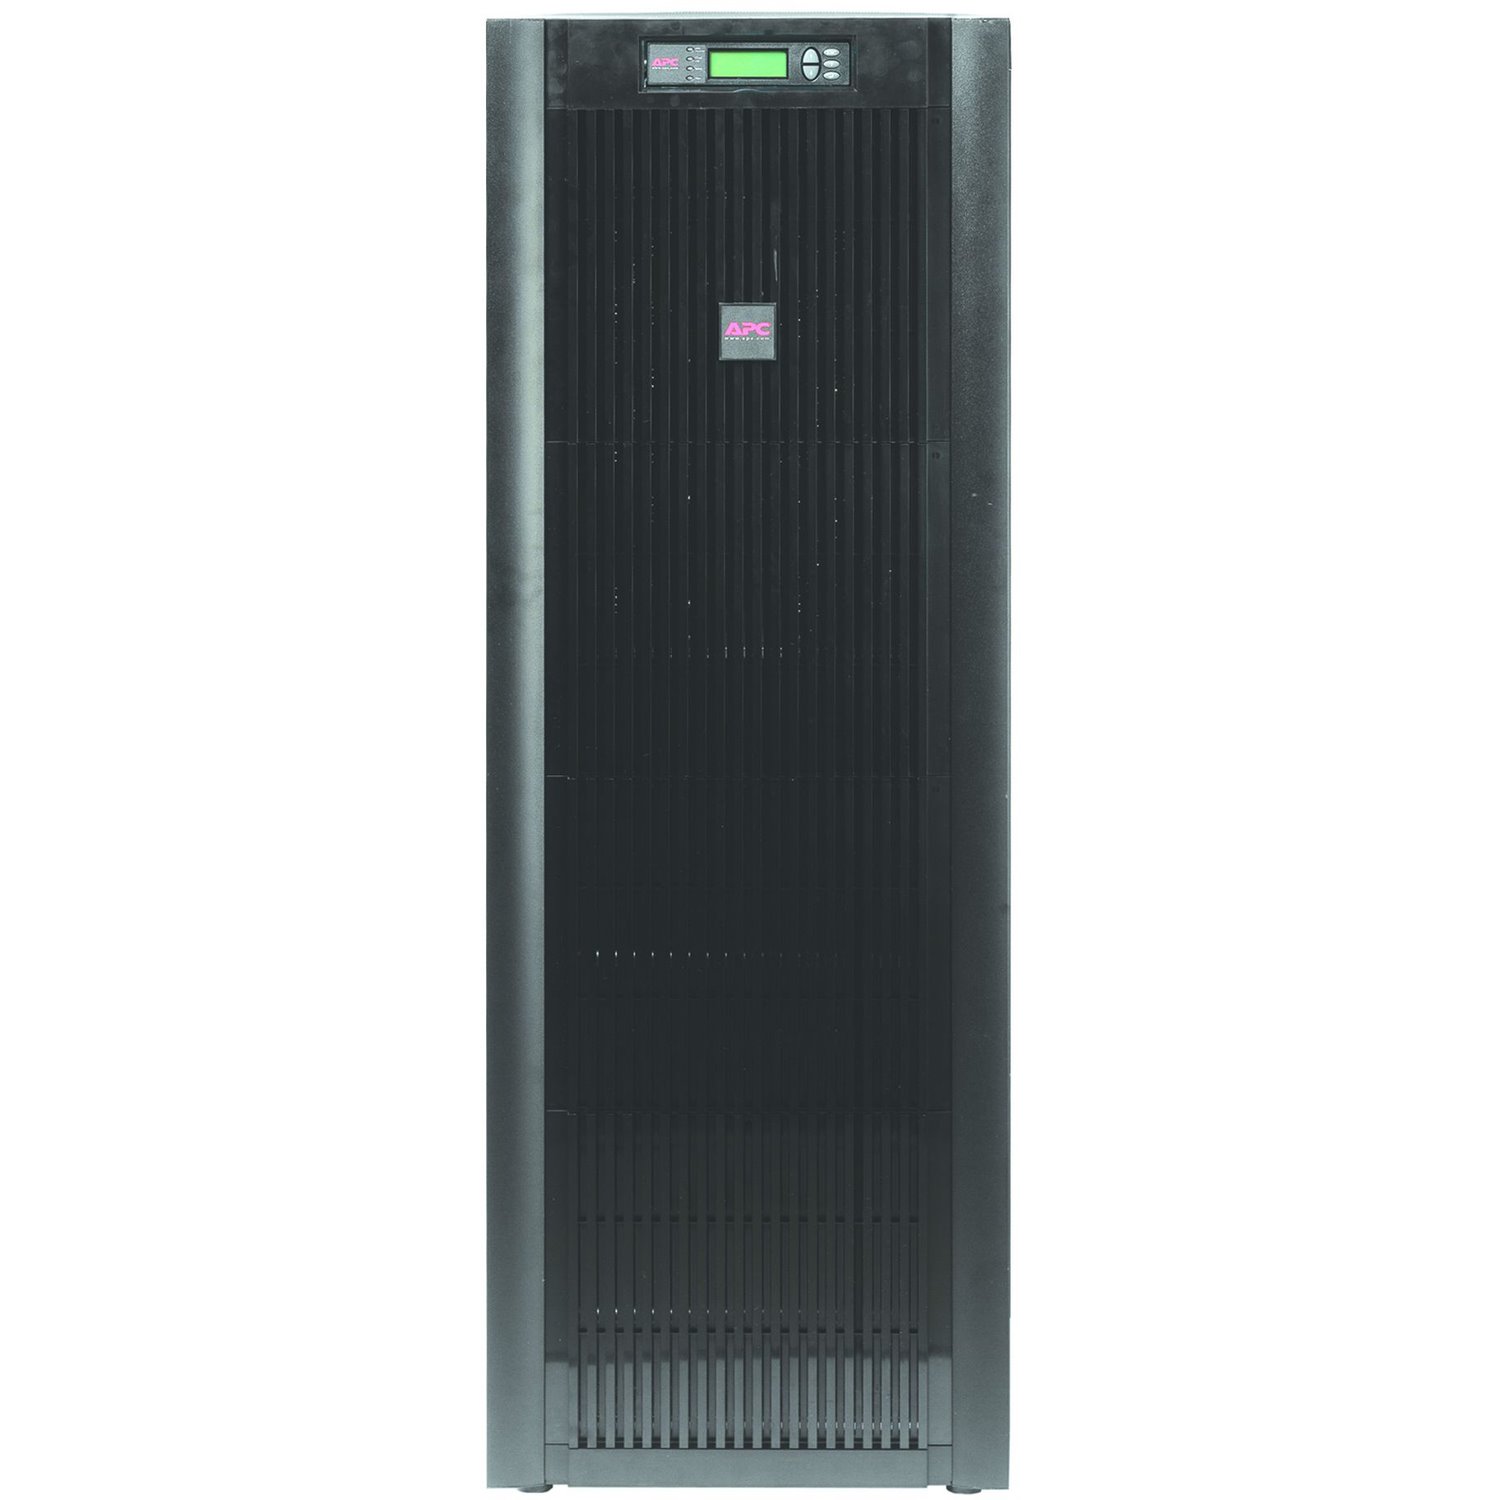 APC by Schneider Electric Smart-UPS Double Conversion Online UPS - 20 kVA